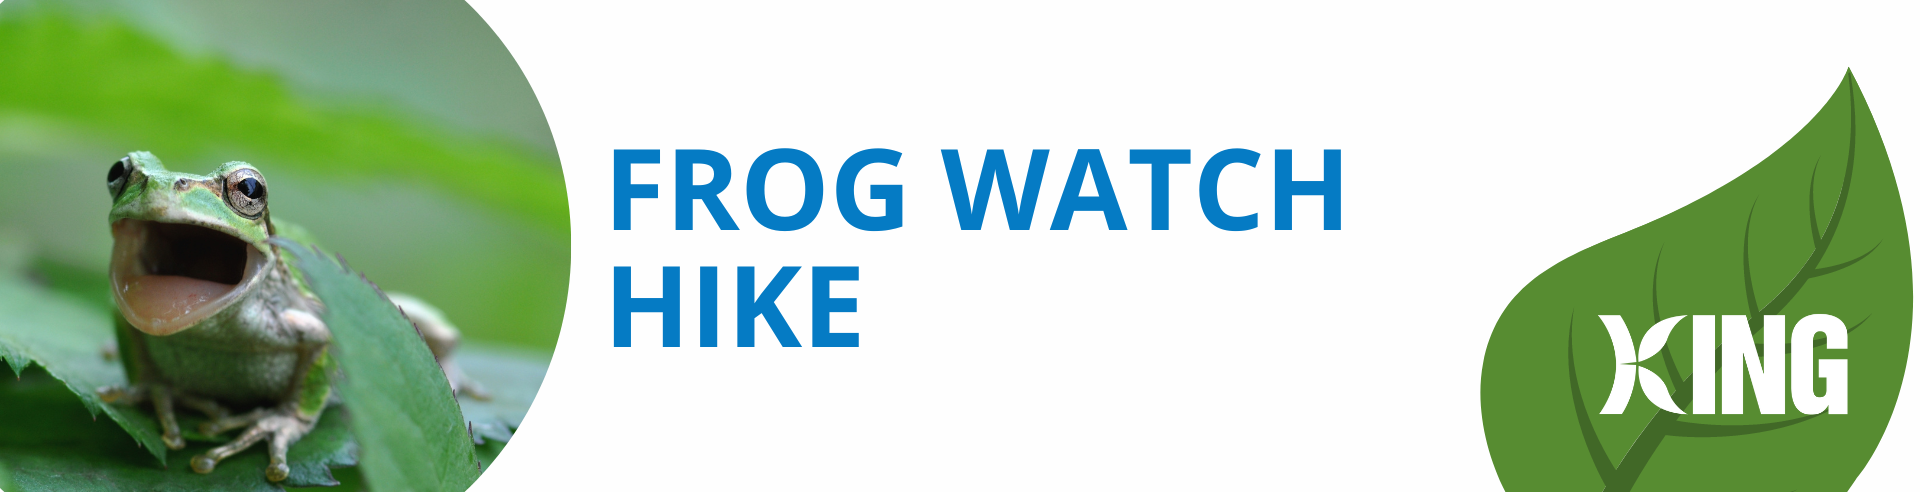 Frog Watch Hike Banner